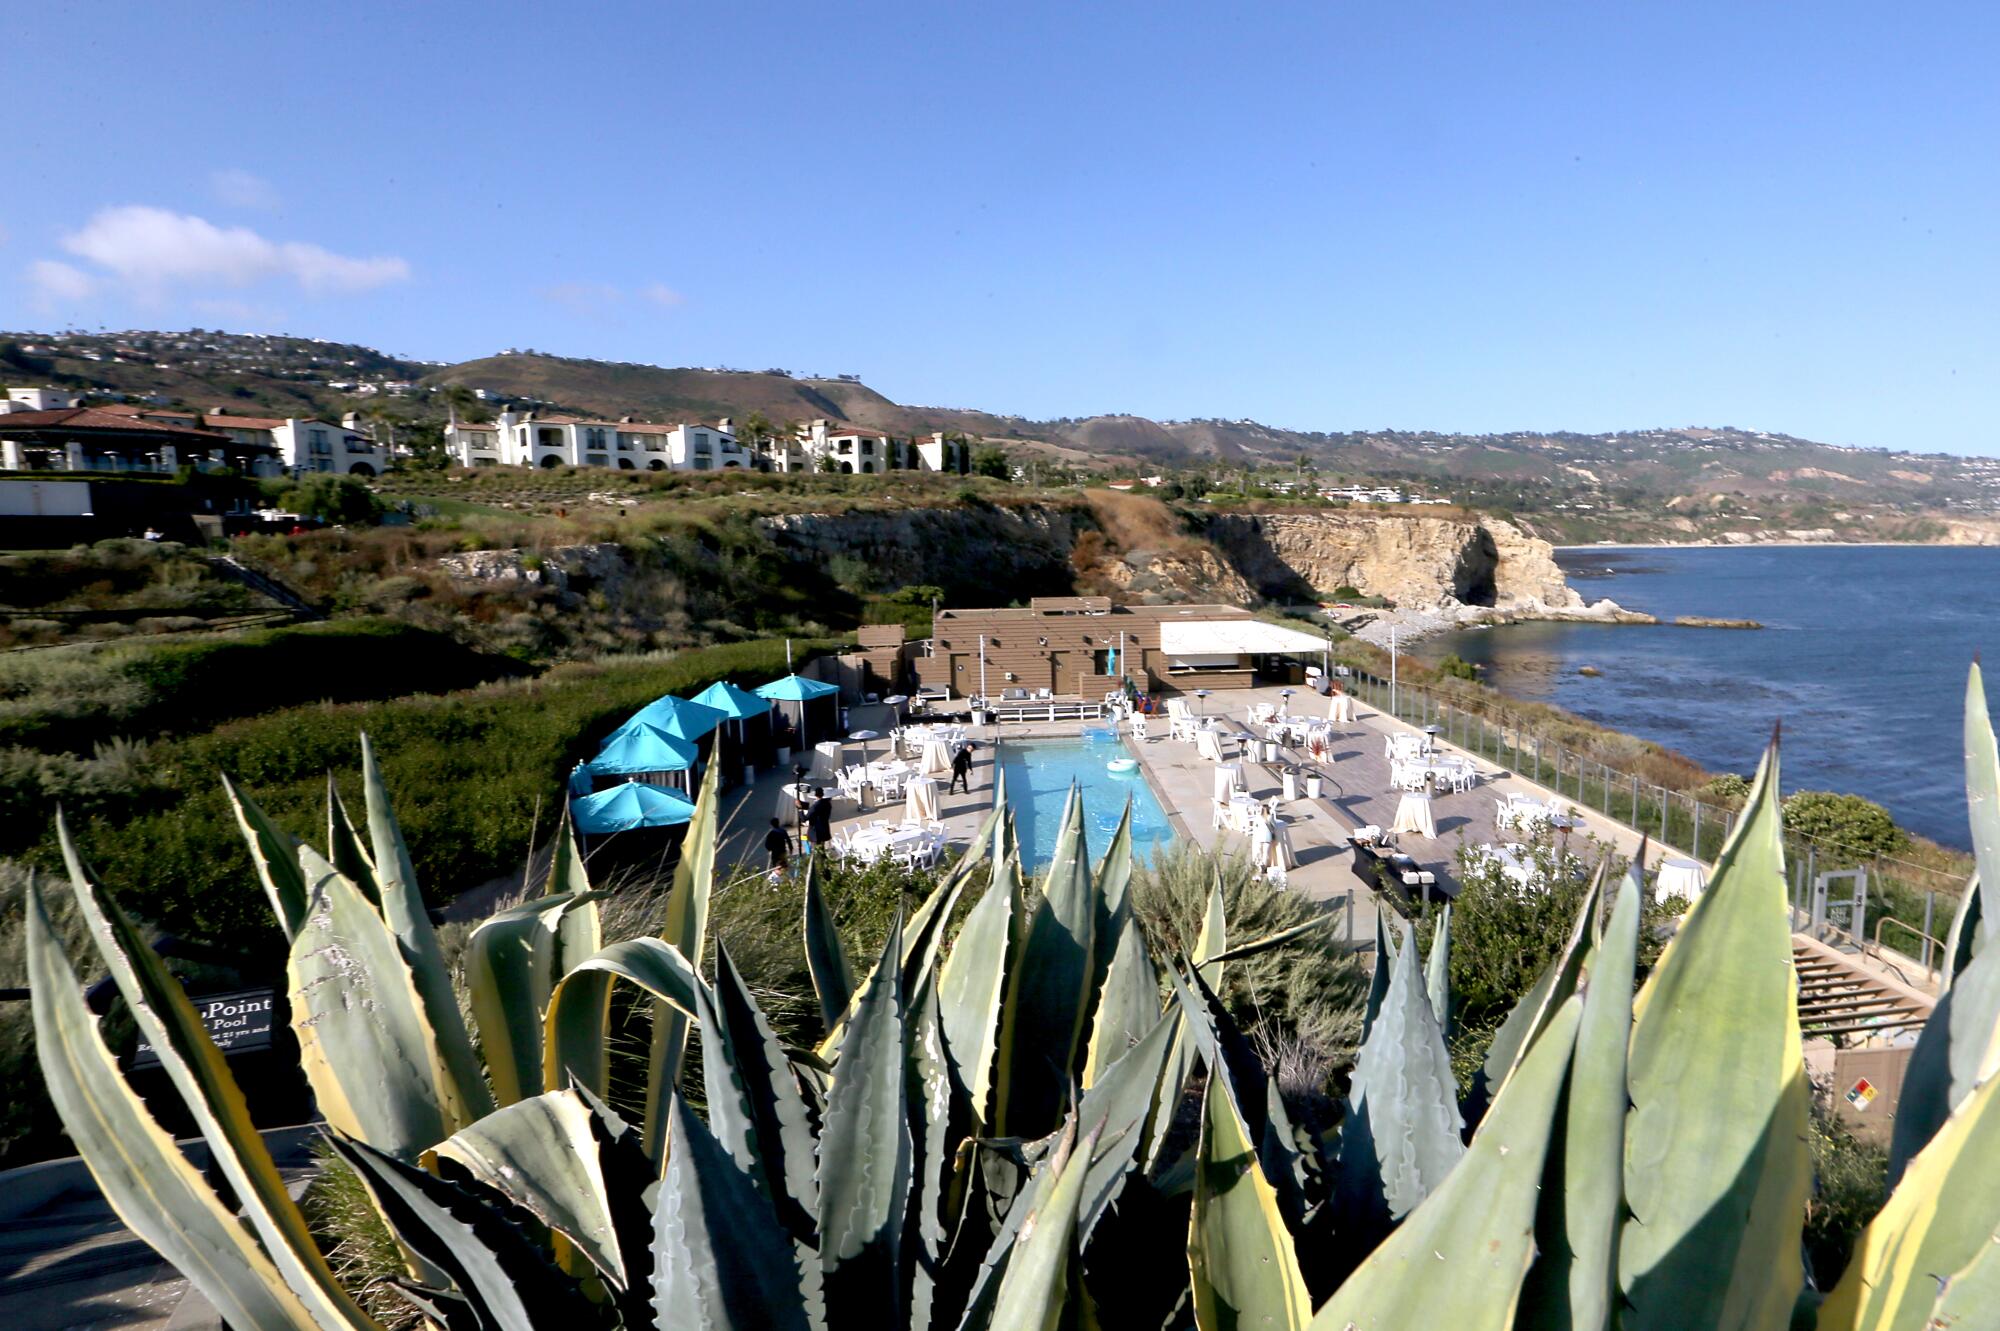 Terranea Resort, a luxurious hotel-and-spa compound, in Rancho Palos Verdes.